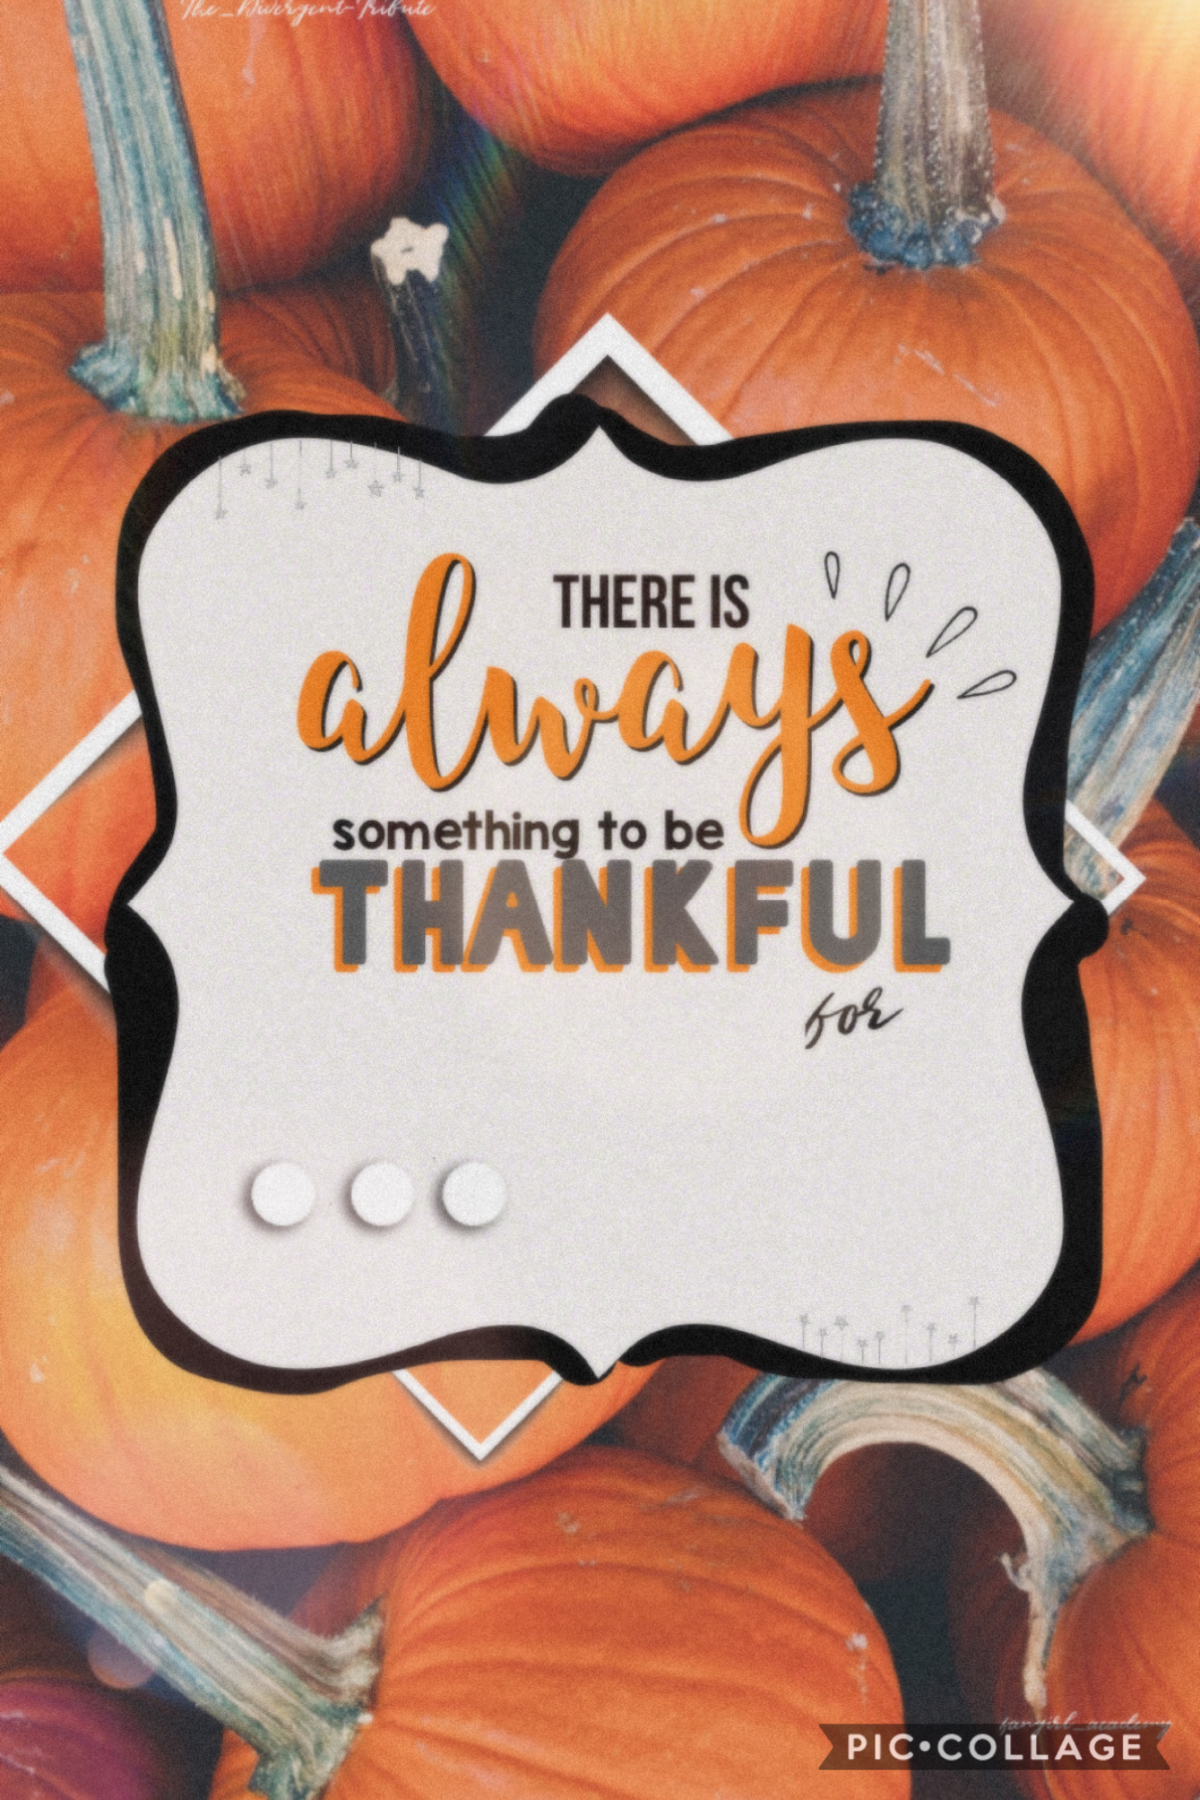 Late Thanksgiving edit! Hope y’all found something to be thankful for! 🍁🍁
QOTD: Favorite Thanksgiving dish?
AOTD: Mom’s sweet potato casserole! 🍠😋

🧡Have a great day!🧡